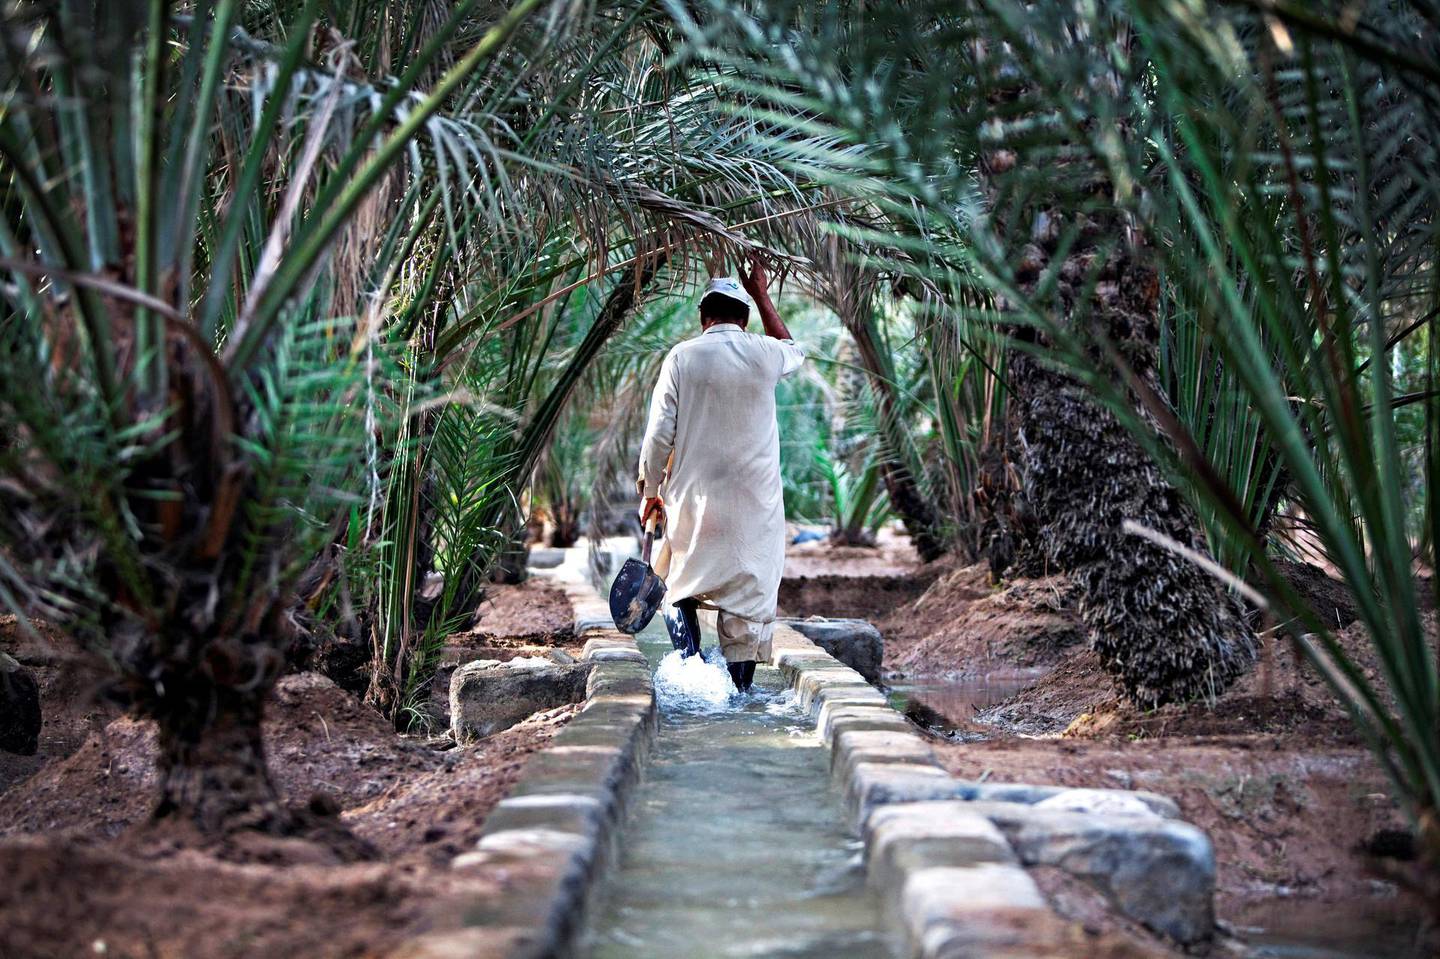 Al Ain, April 18, 2011 - Gatekeeper Imam Bakhsh walks toward another gate where he will move rocks and cloth to allow water to irrigate another date palm section in Hill Oasis in Al Ain, April 18, 2011. (Jeff Topping/The National) 